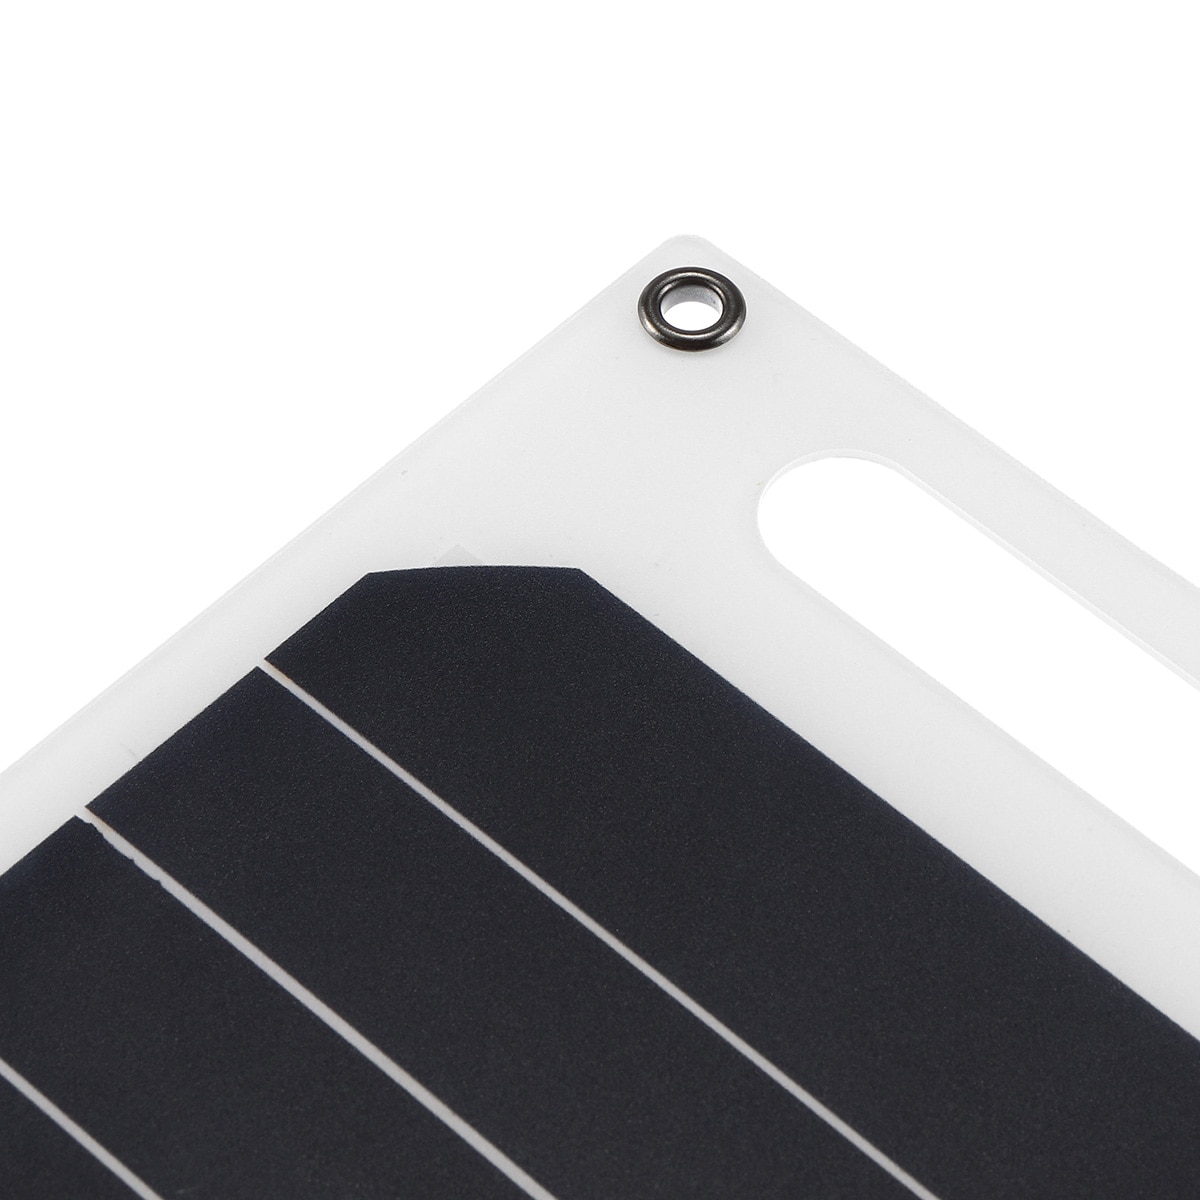 Solar Panel Charger Charging Device